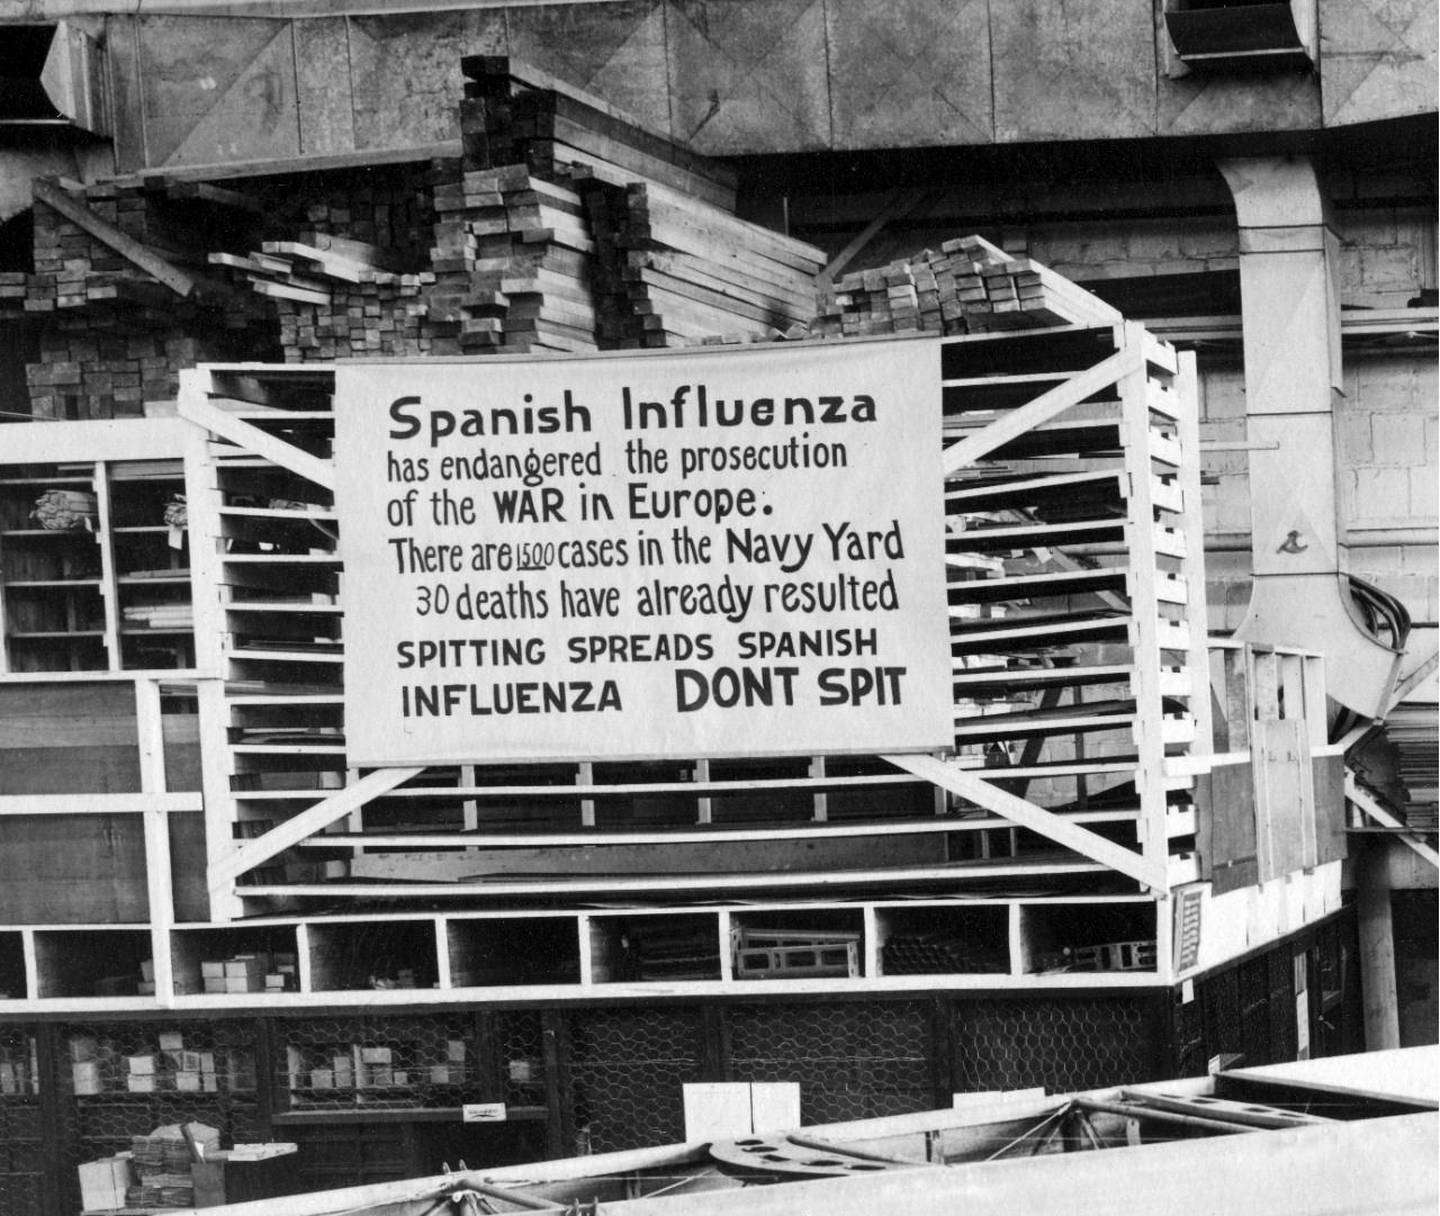 FILE - In this Oct. 19, 1918 file photo provide by the U.S. Naval History and Heritage Command a sign is posted at the Naval Aircraft Factory in Philadelphia that indicates, the Spanish Influenza was then extremely active. Science has ticked off some major accomplishments over the last century. The world learned about viruses, cured various diseases, made effective vaccines, developed instant communications and created elaborate public-health networks. Yet in many ways, 2020 is looking like 1918, the year the great influenza pandemic raged. (U.S. Naval History and Heritage Command via AP)